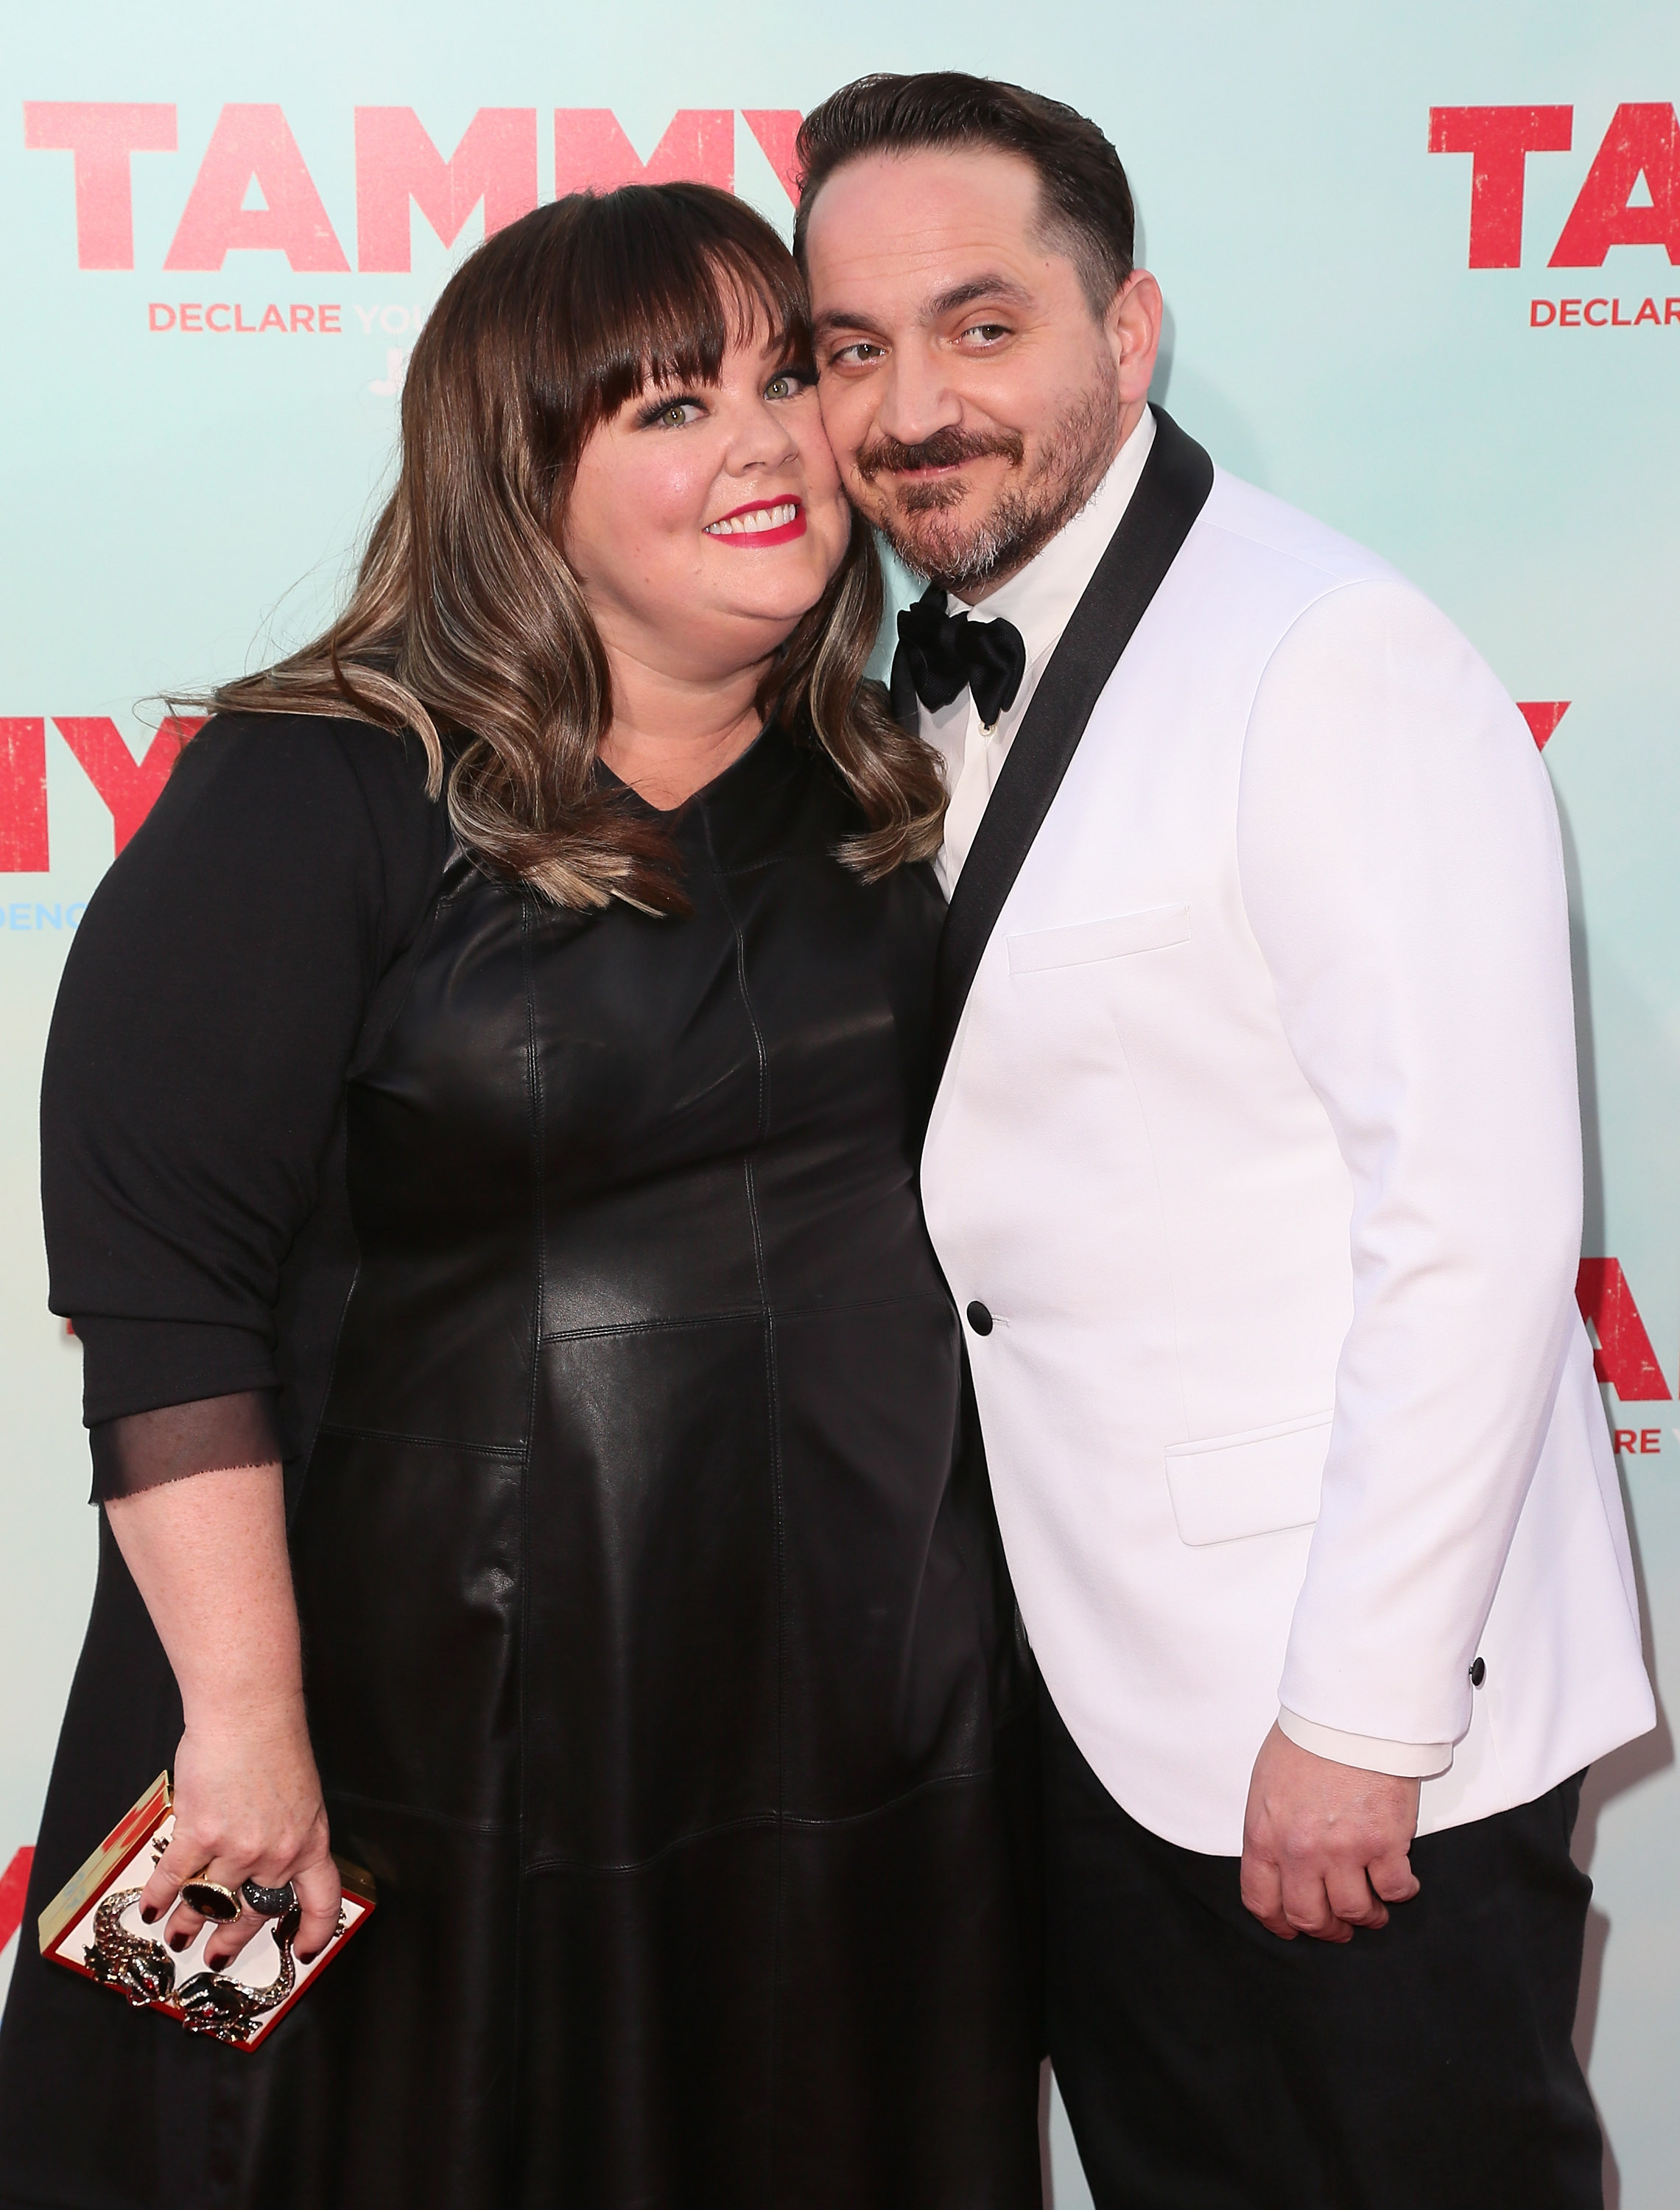 Melissa McCarthy and her husband Ben Falcone at the premiere of "Tammy" on June 30, 2014, in Hollywood, California | Source: Getty Images